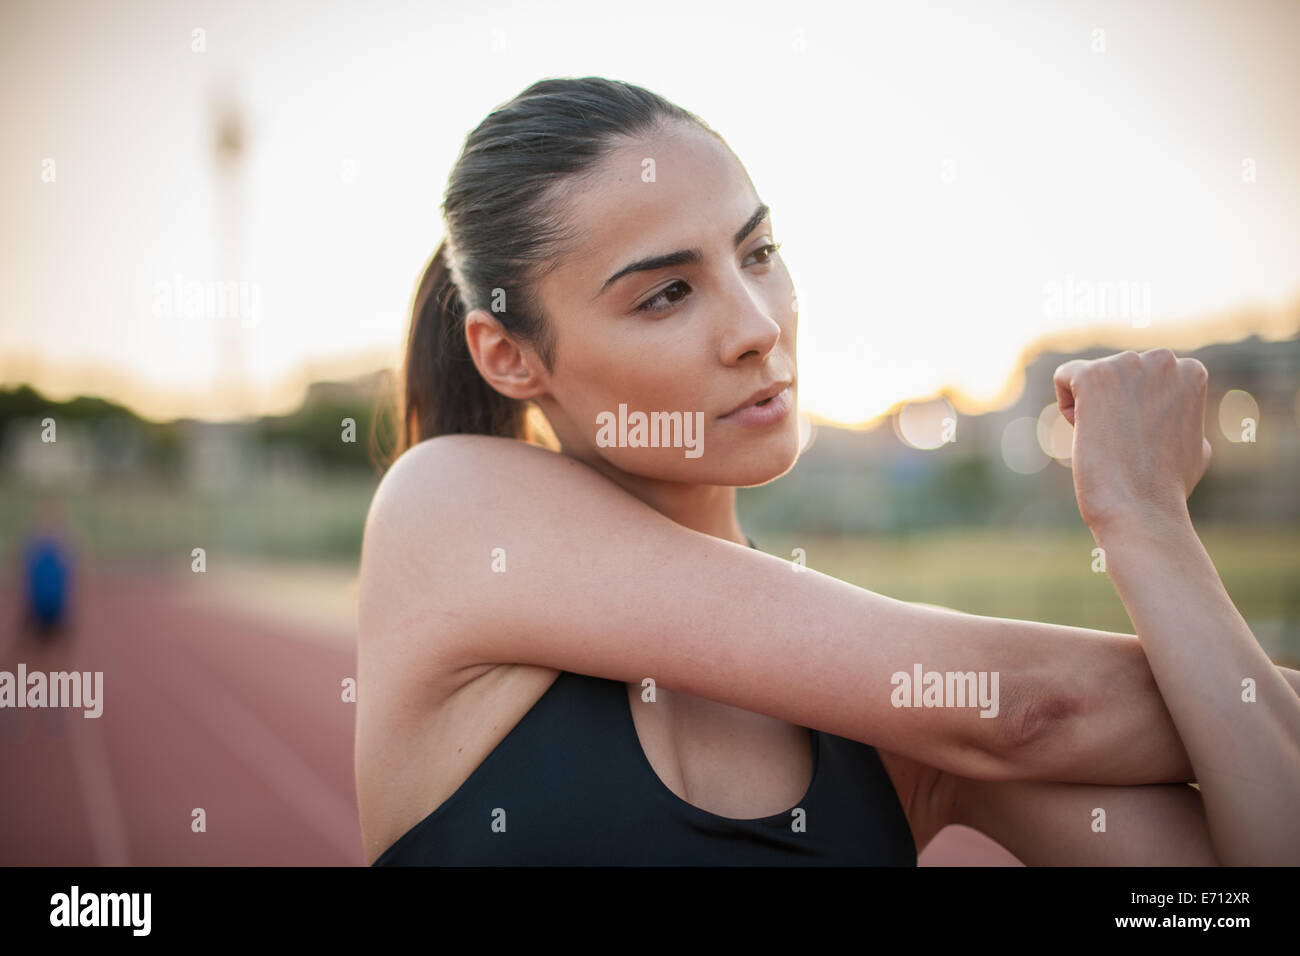 Young woman stretching arm Stock Photo